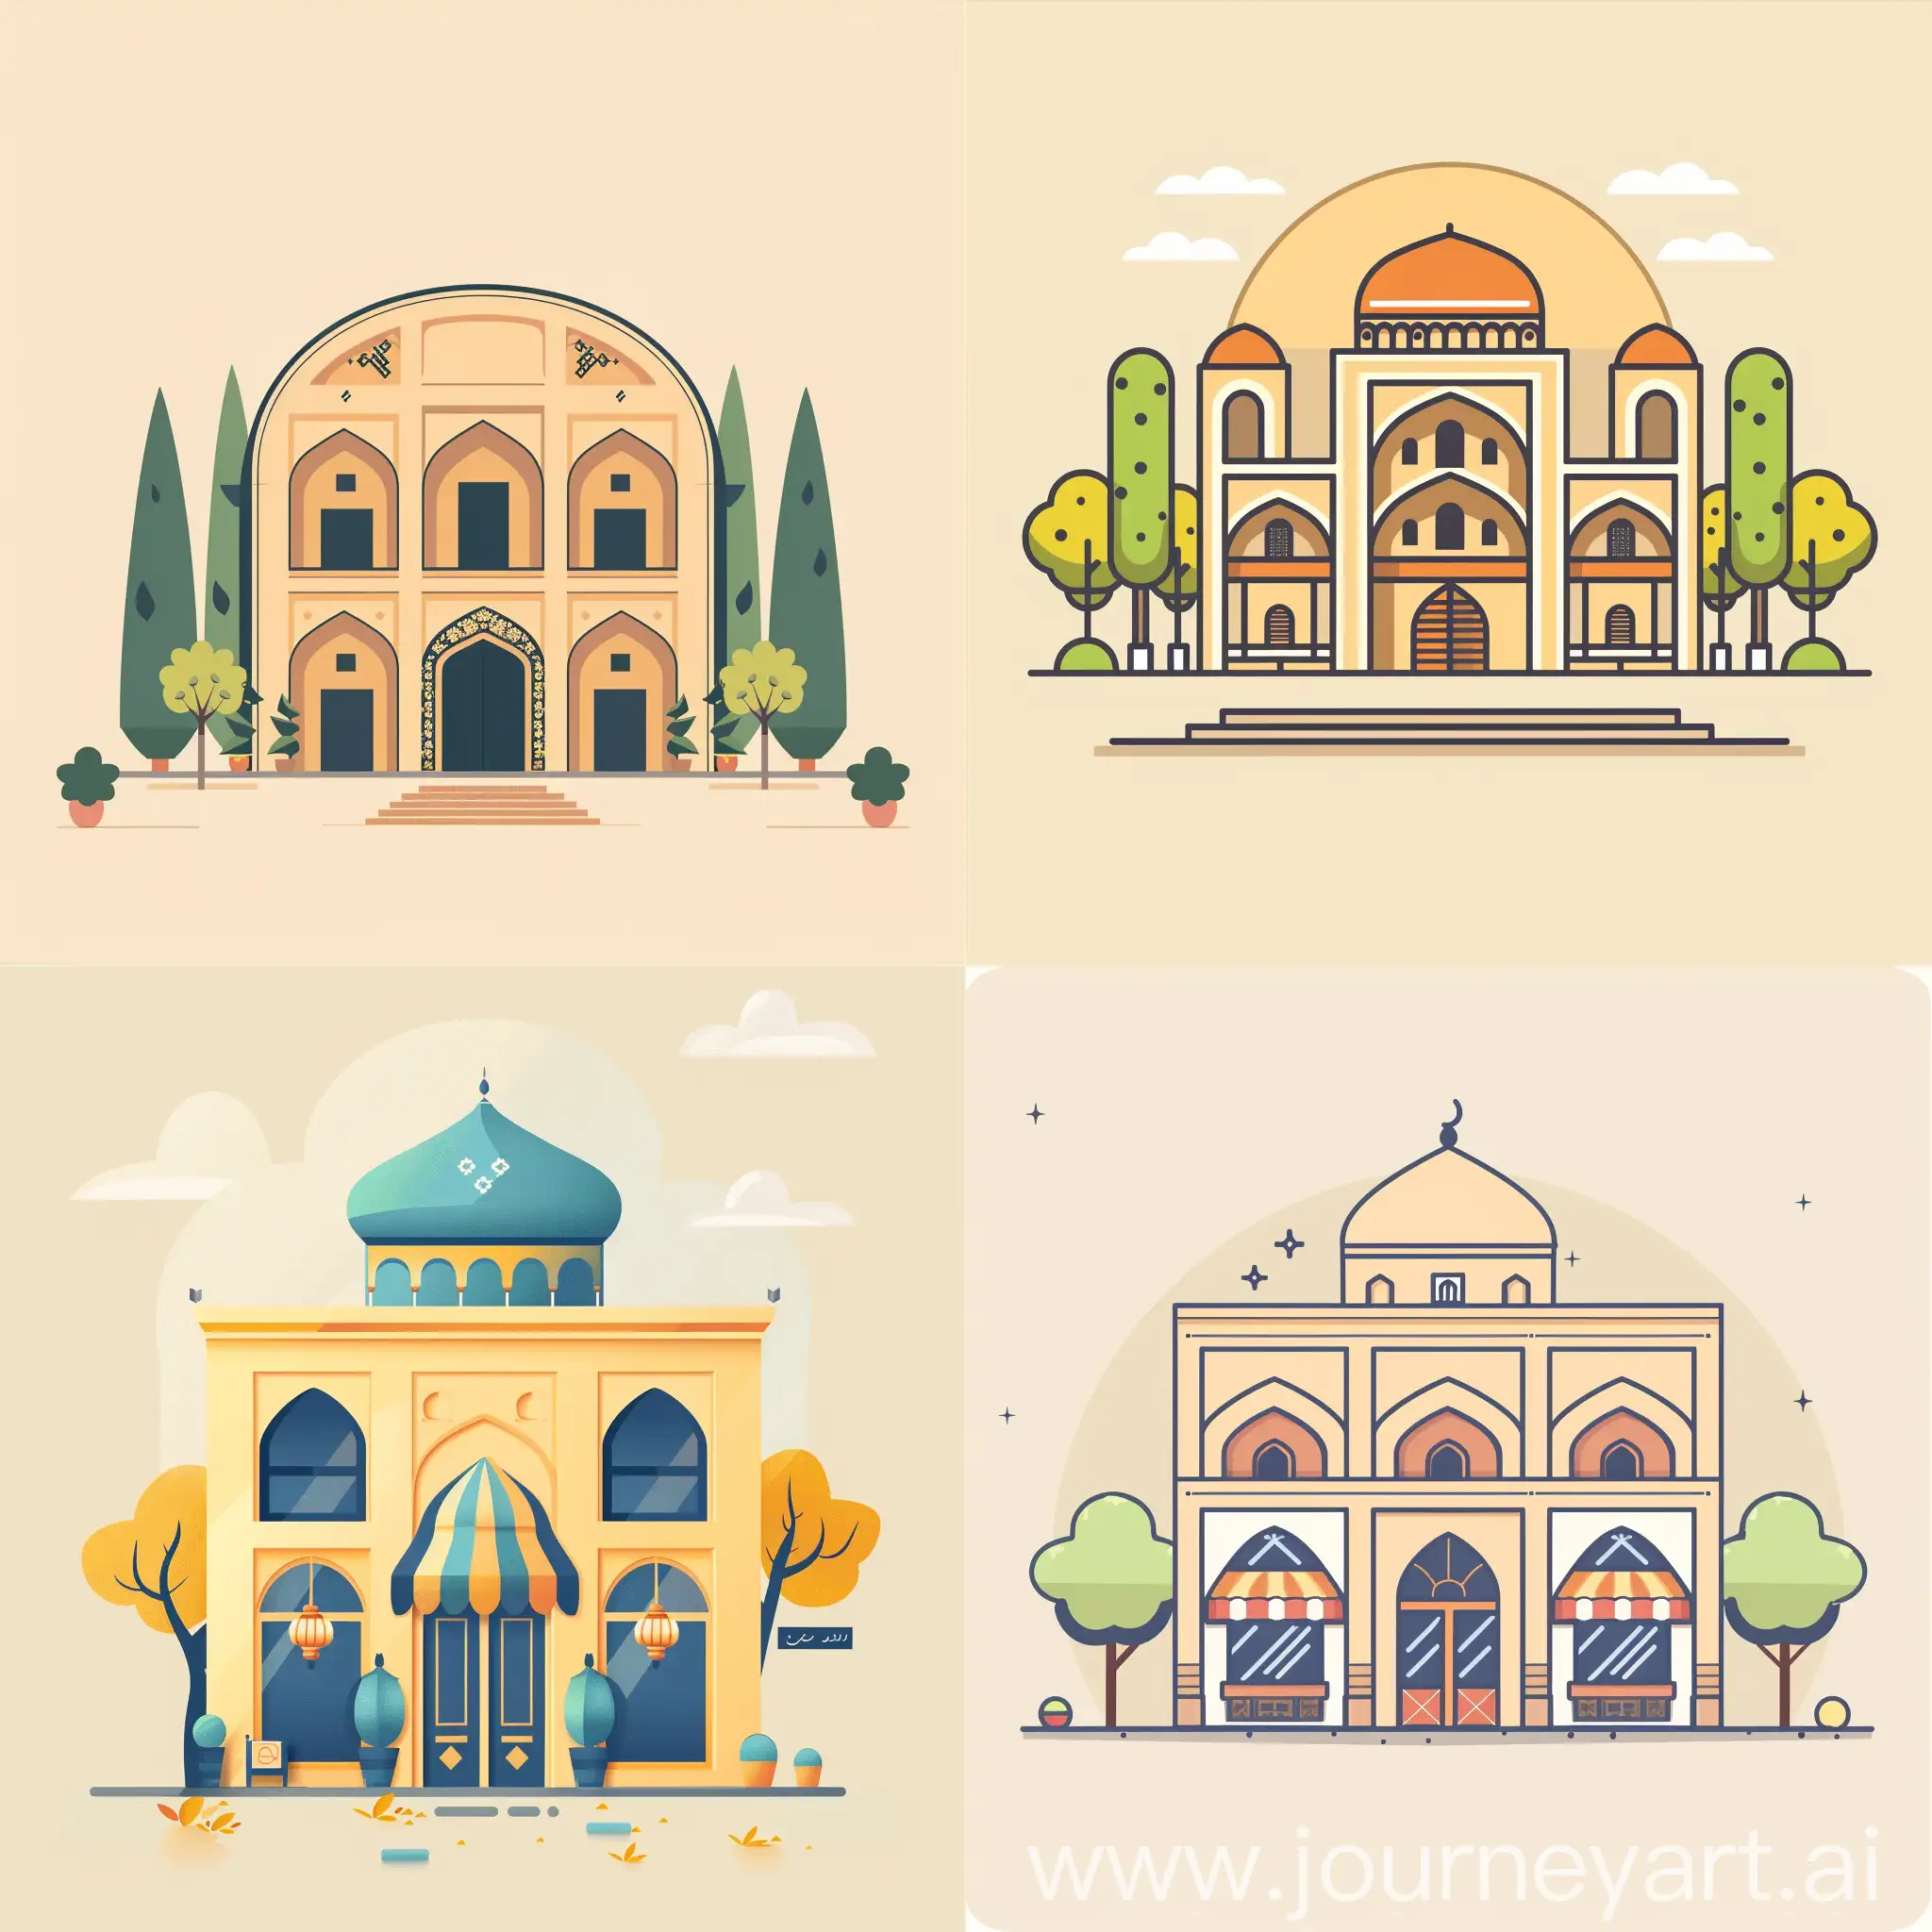 illustration a minimal graphic image about "How to build ecommerce website in Kashan city in Iran" using Iranian architecture concept in it with a simple plain color background